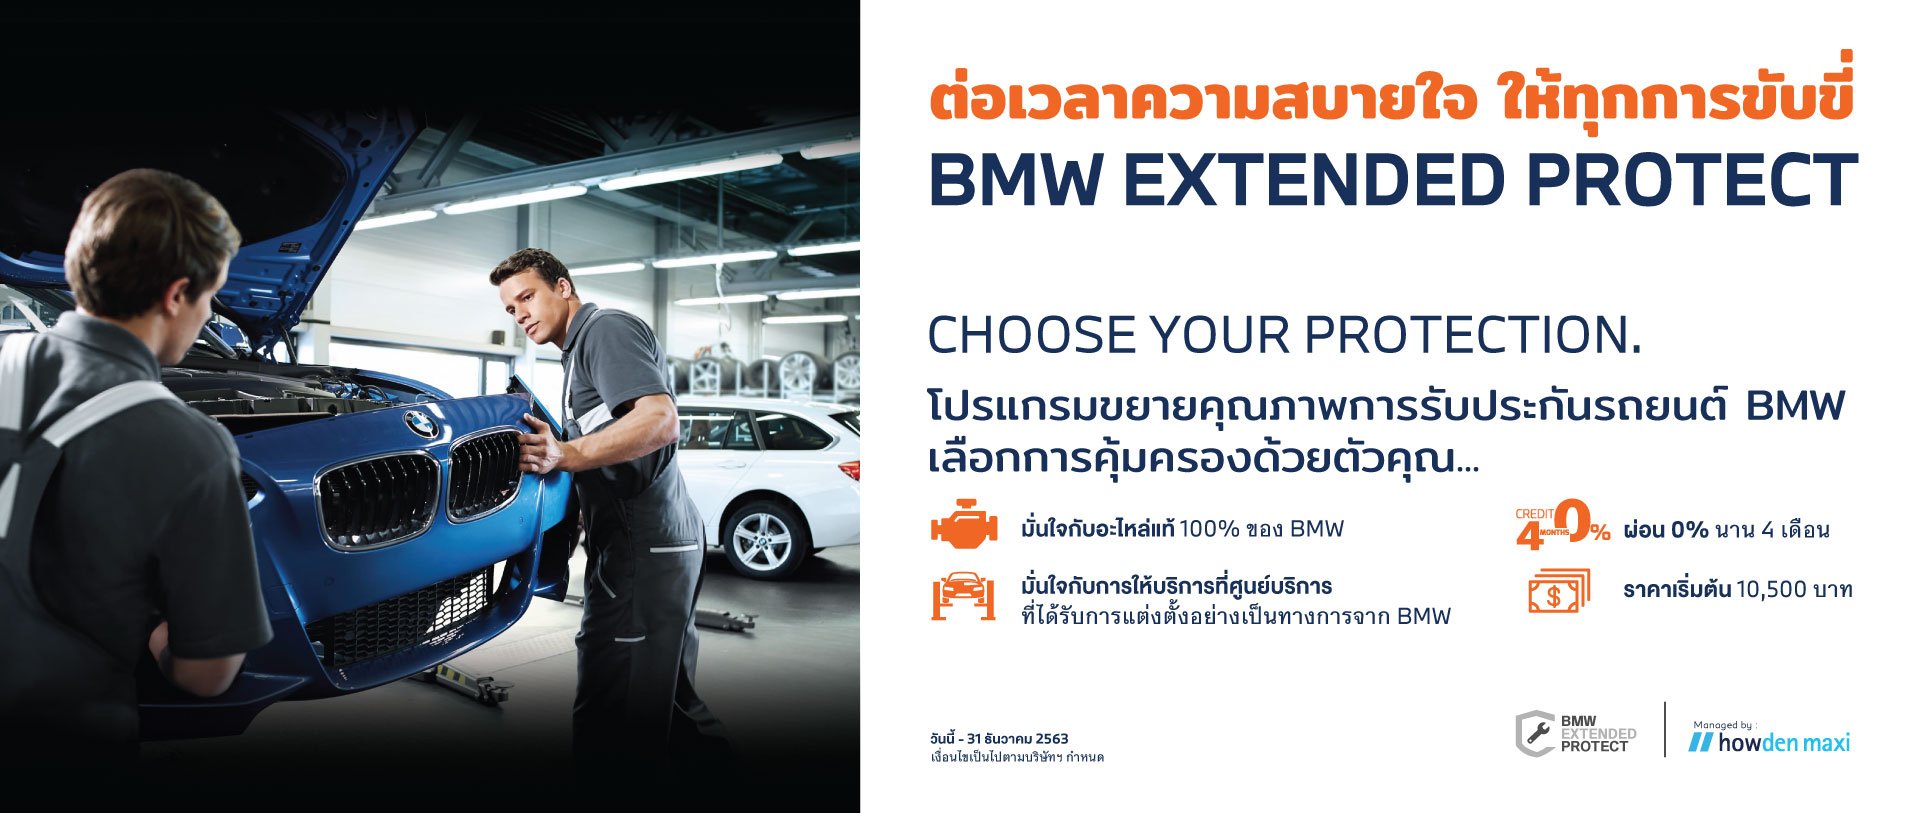 BMW extended